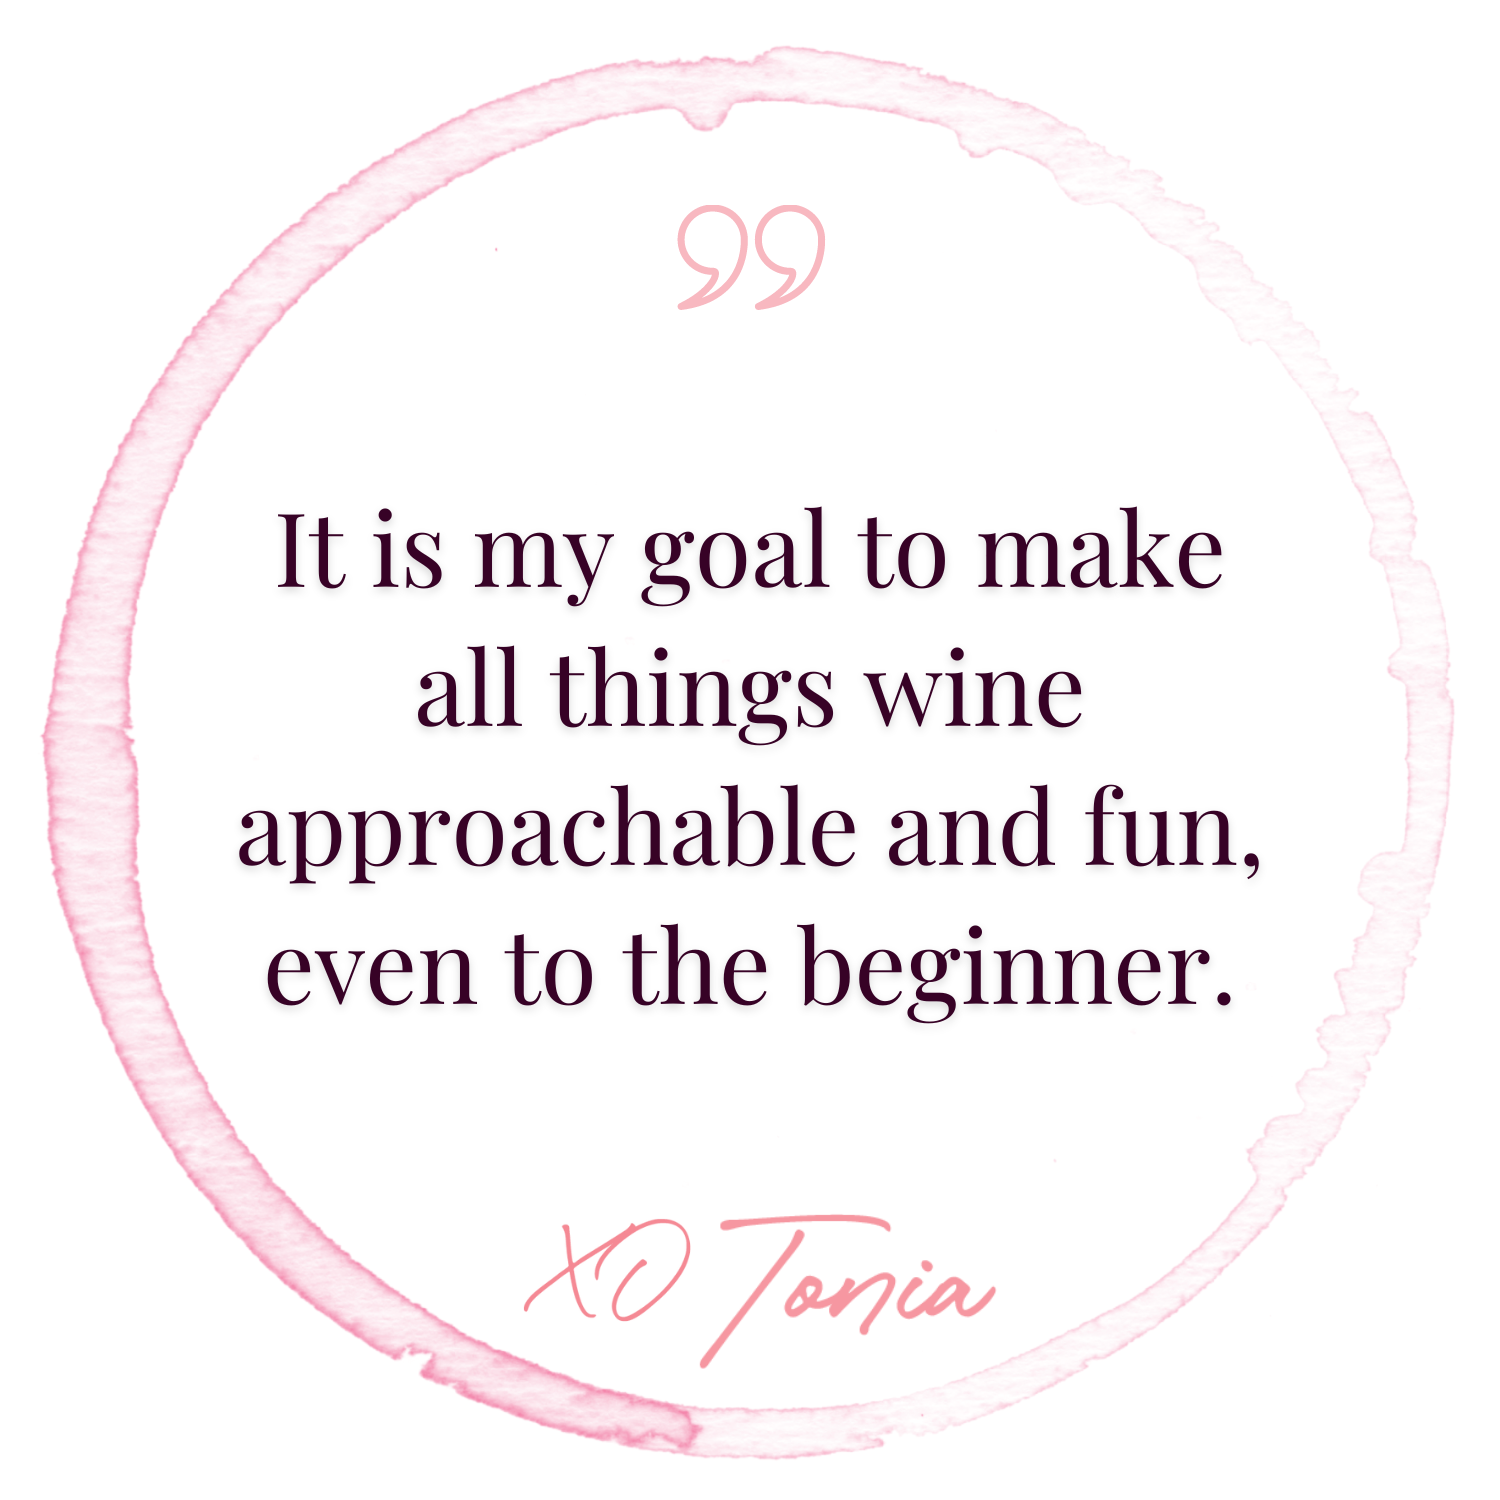 Its my goal to make all things wine approachable and fun, even to the beginner